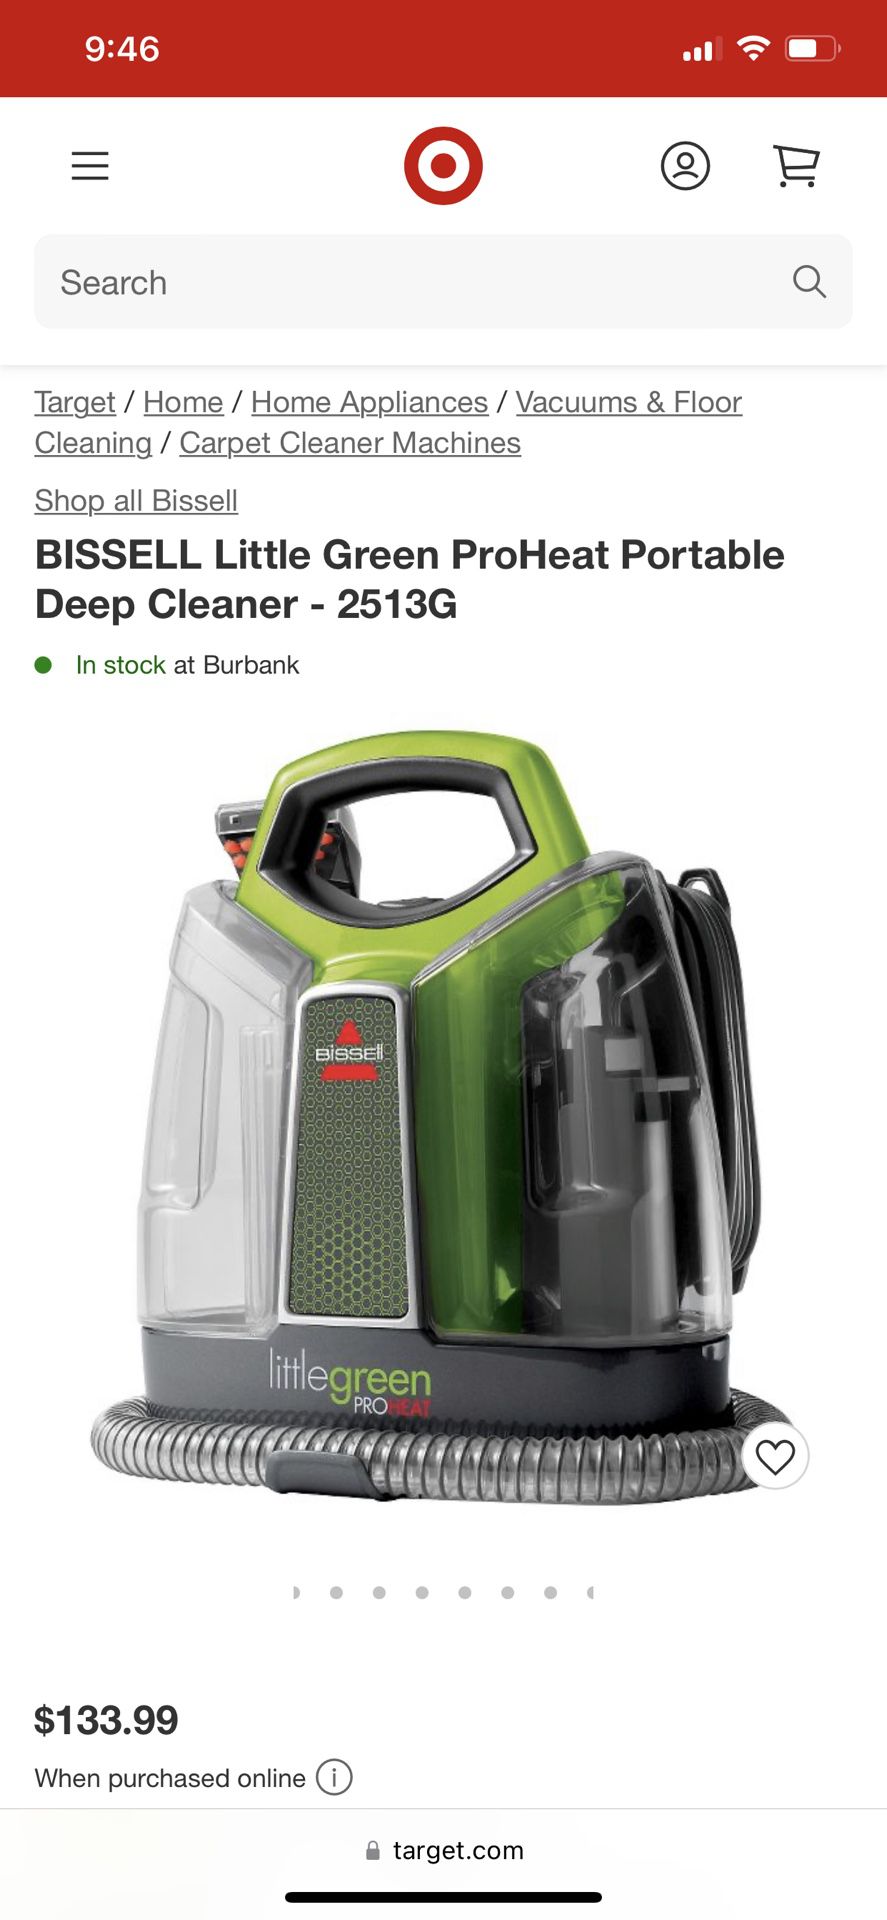 Bissell Little Green ProHeat Portable